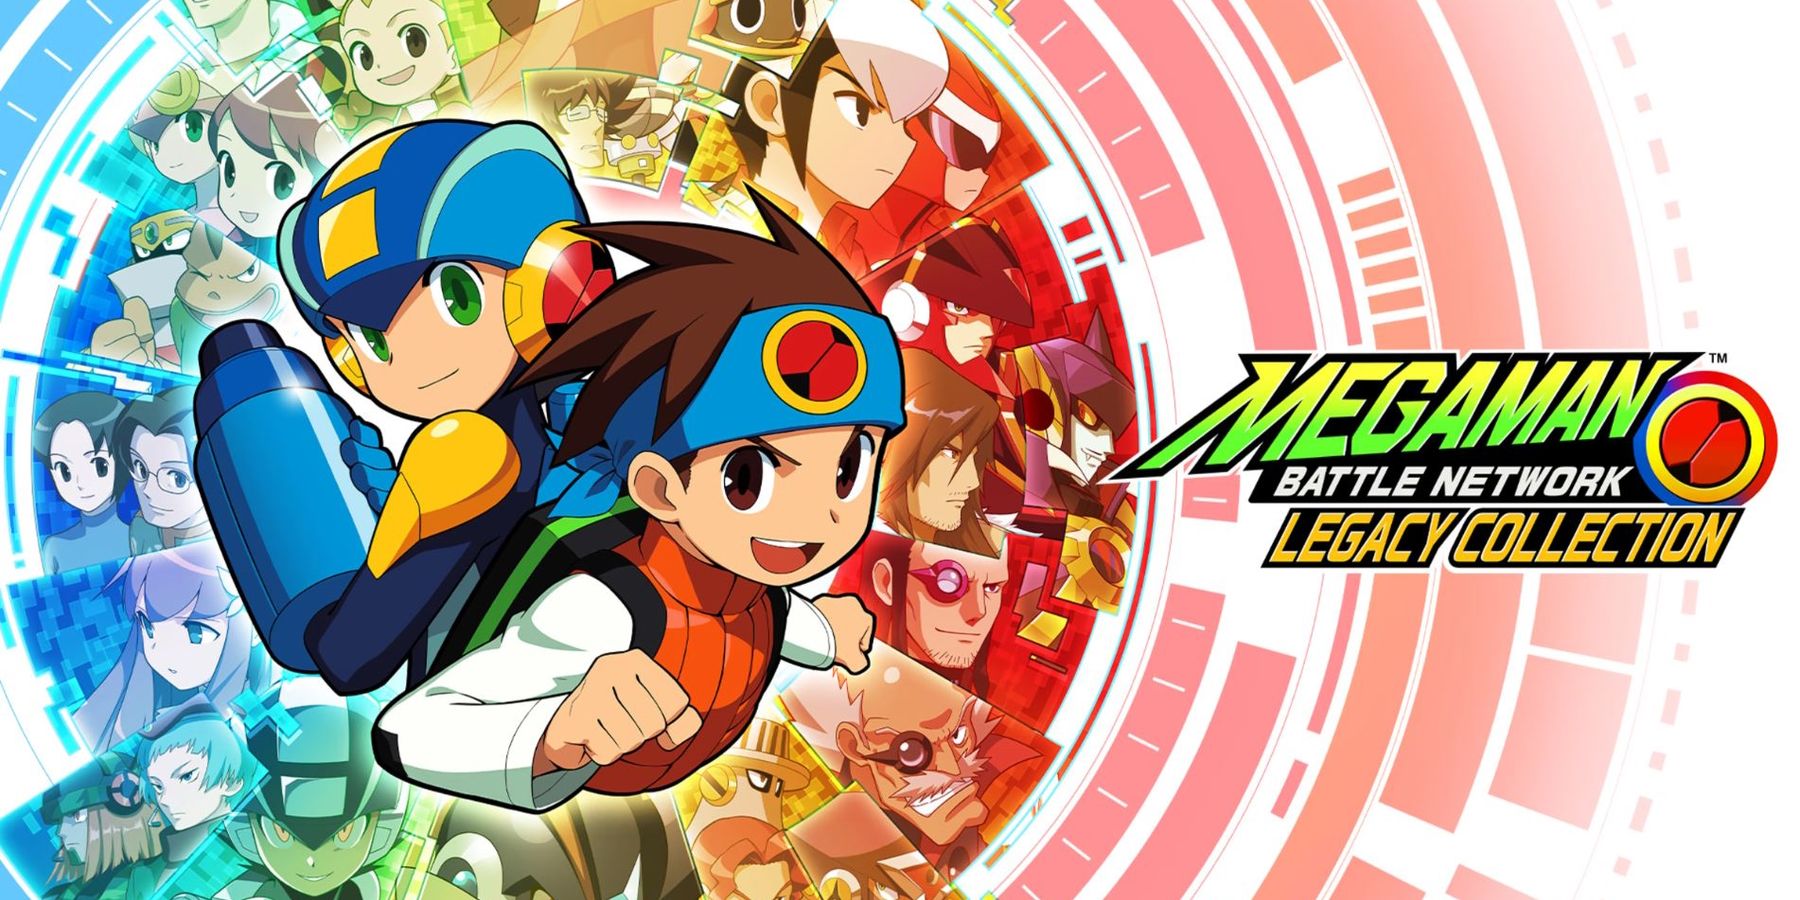 Mega Man Battle Network Legacy Collection Cover Image with Mega Man and Lan to the left and the words